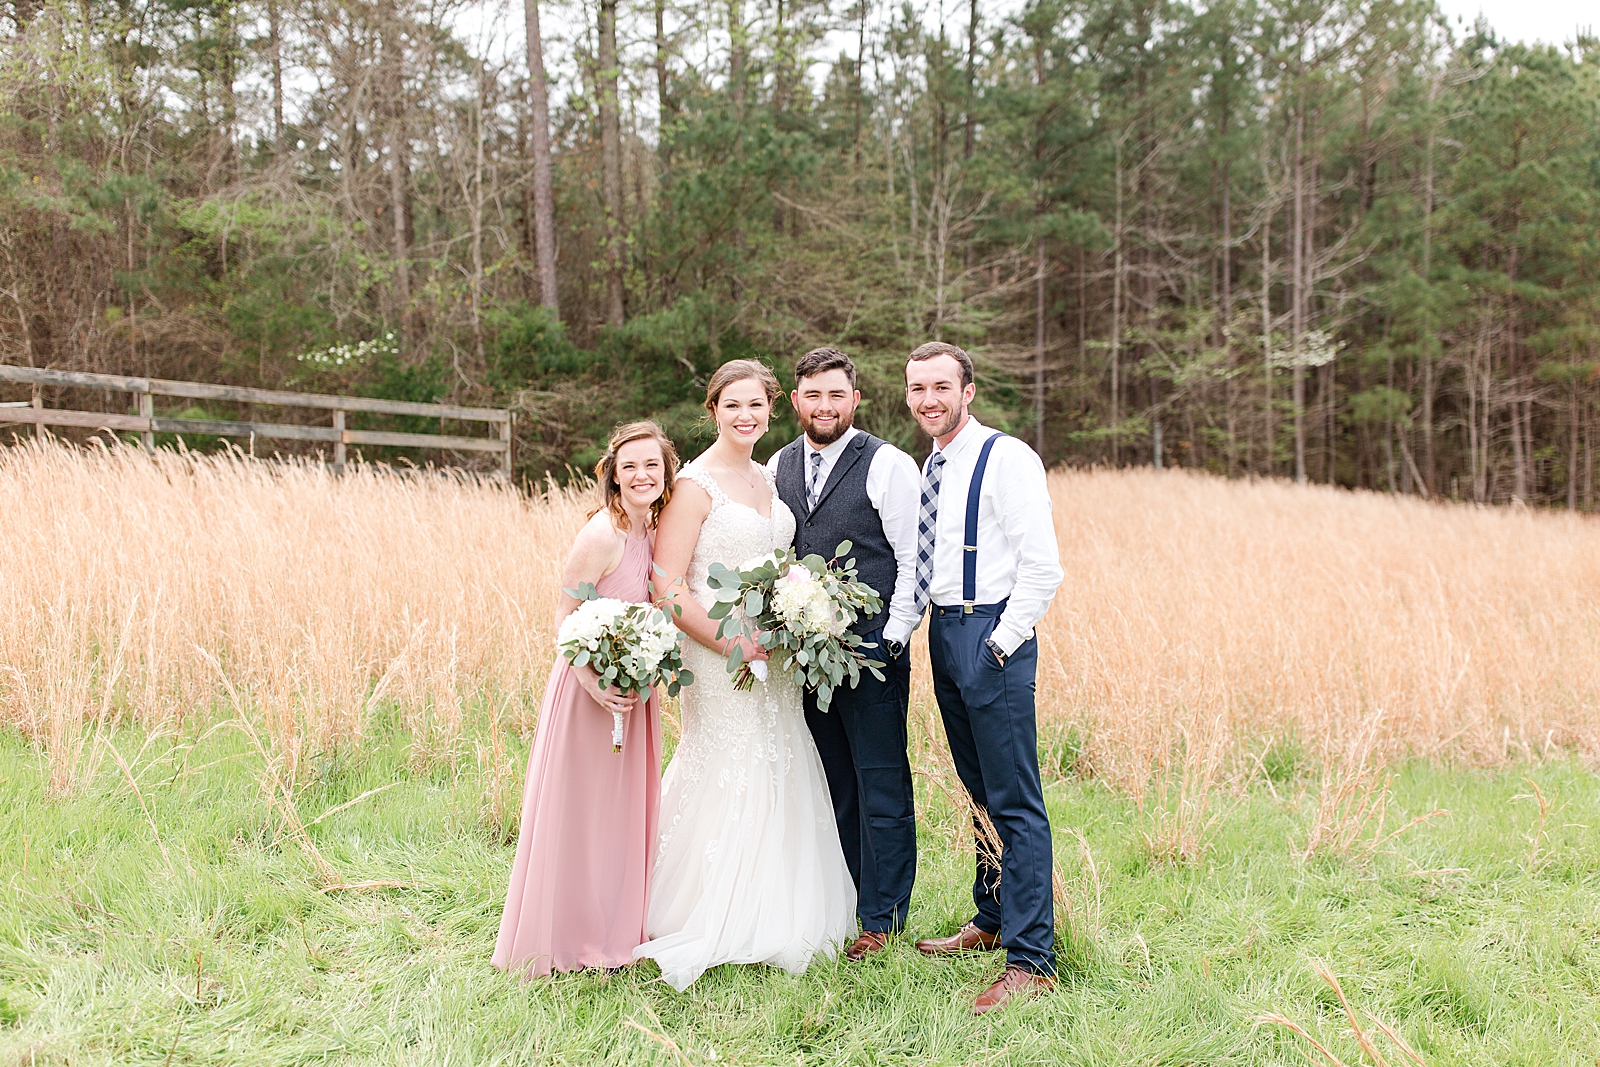 Macedonia Hills Wedding Bride and Groom with Maid of Honor and Best Man Photo